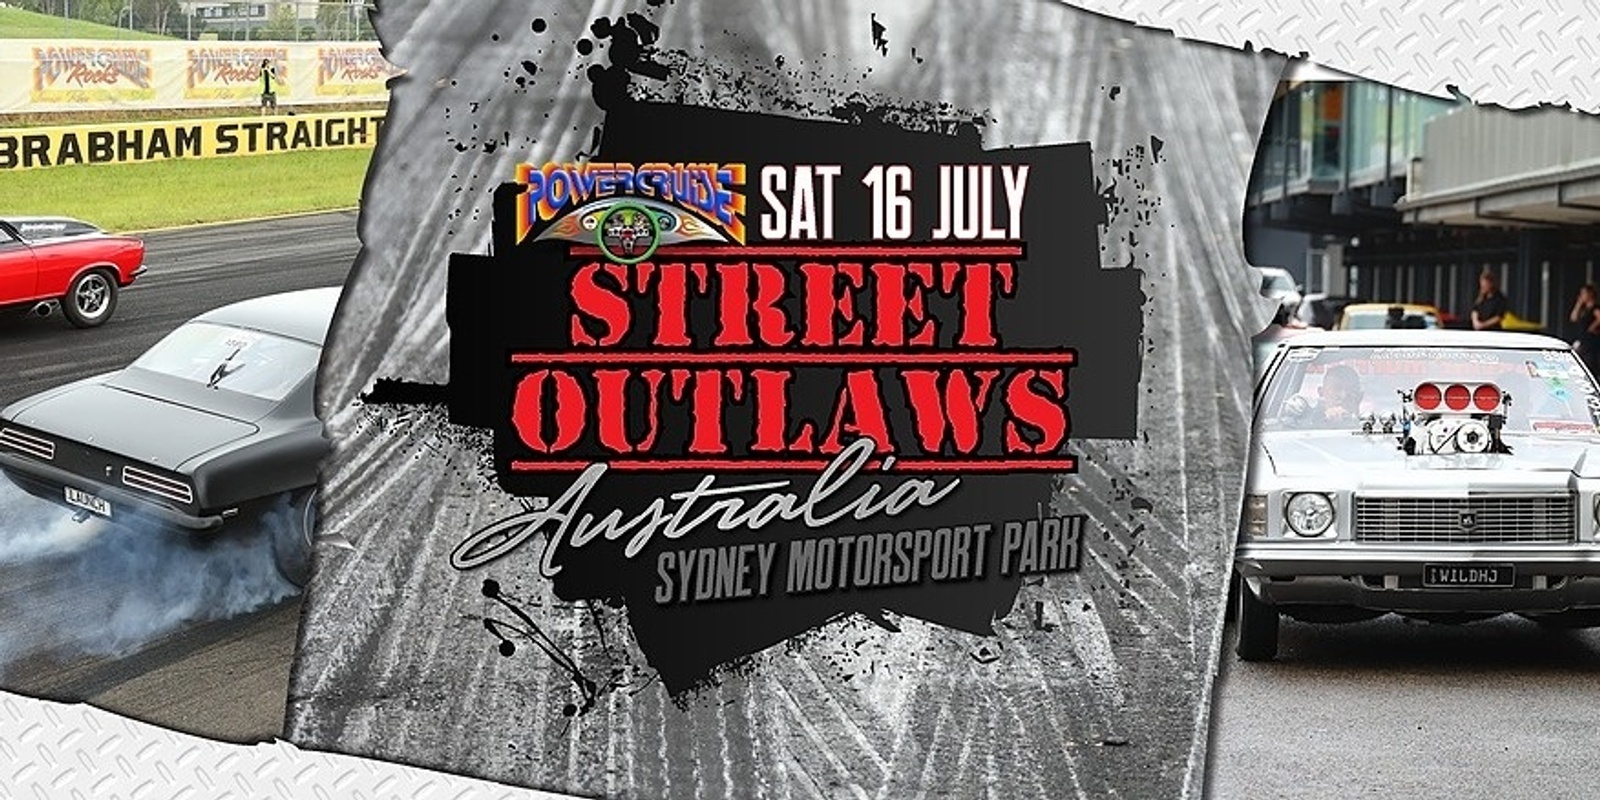 Street Outlaws Australia by Powercruise 16th July 2022 Sydney Humanitix